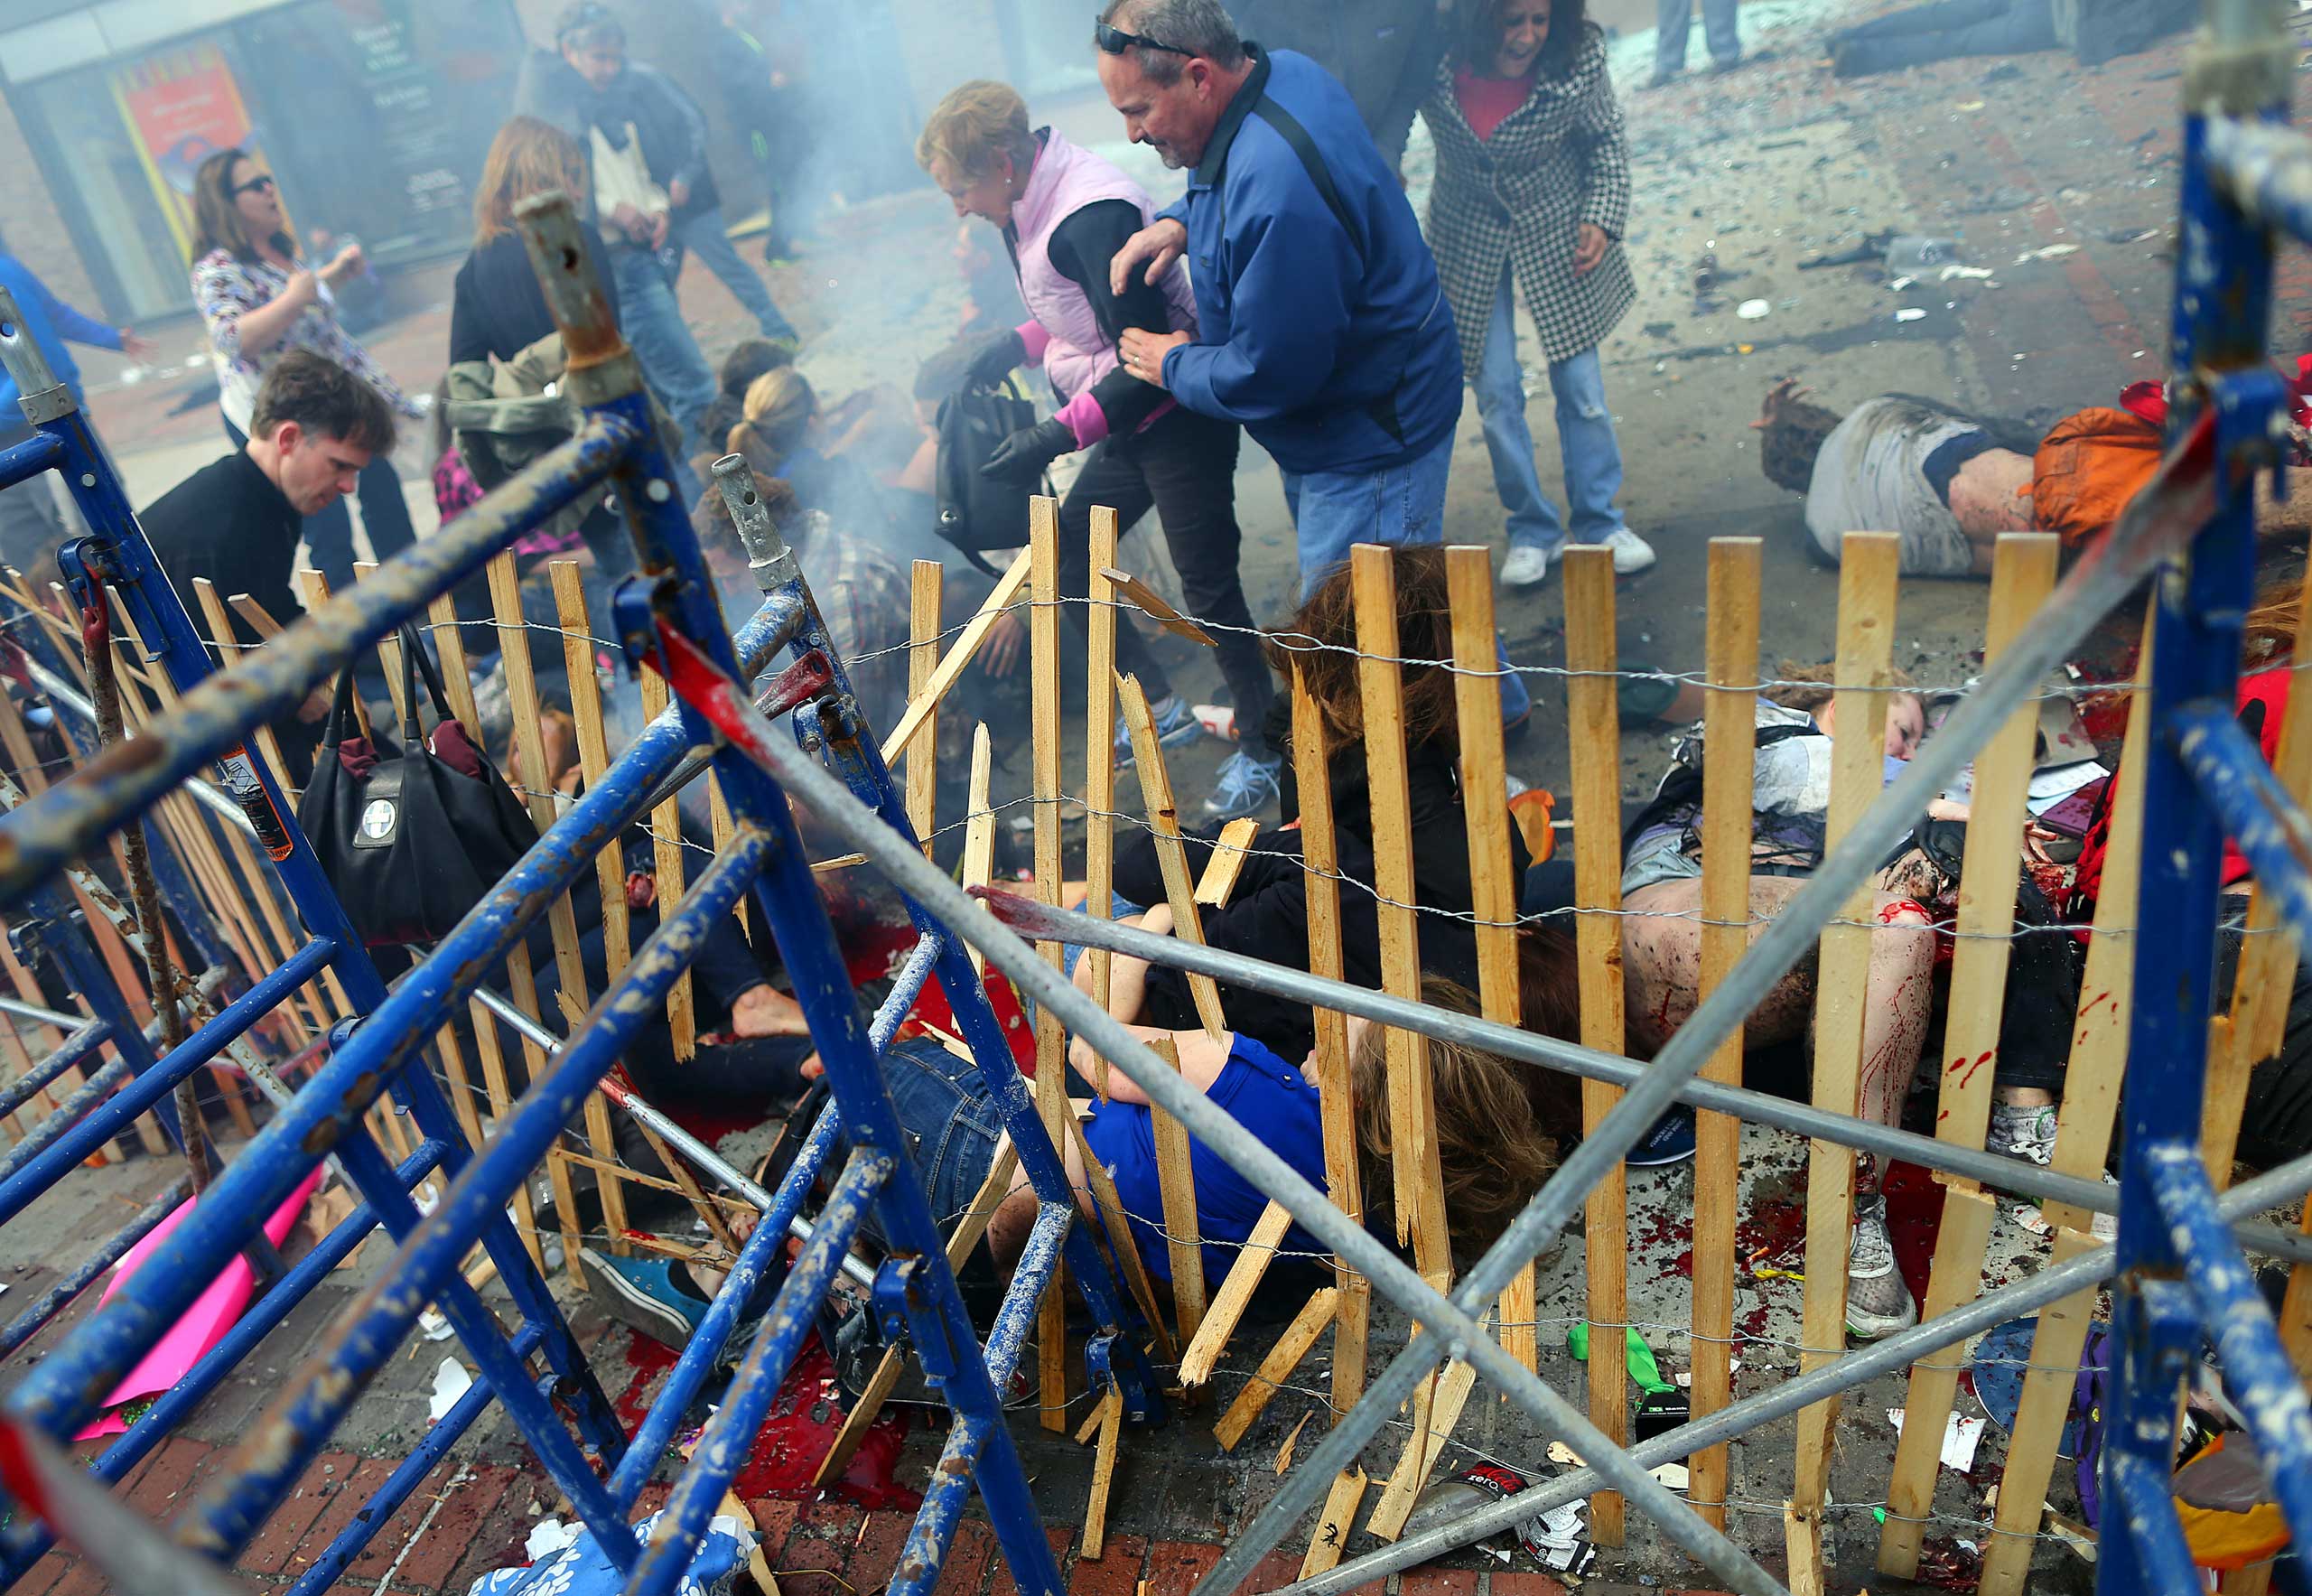 April 15, 2013. Victims lie on the sidewalk near a barrier at the scene of the first explosion.